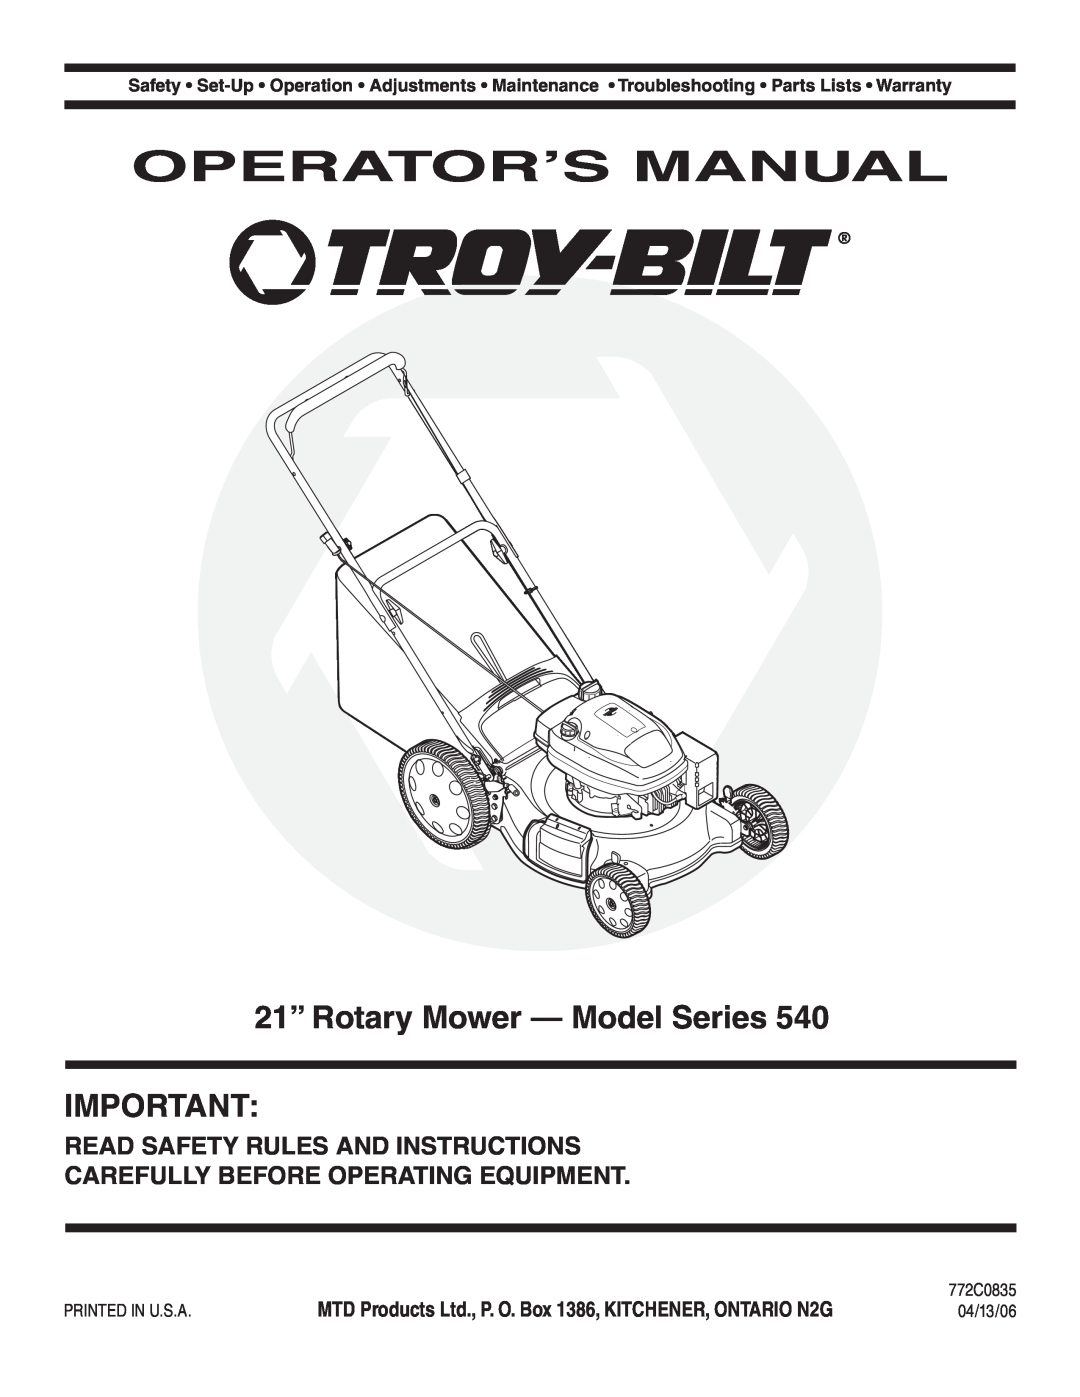 Troy-Bilt 540 Series warranty Operator’S Manual, 21” Rotary Mower - Model Series, Read Safety Rules And Instructions 